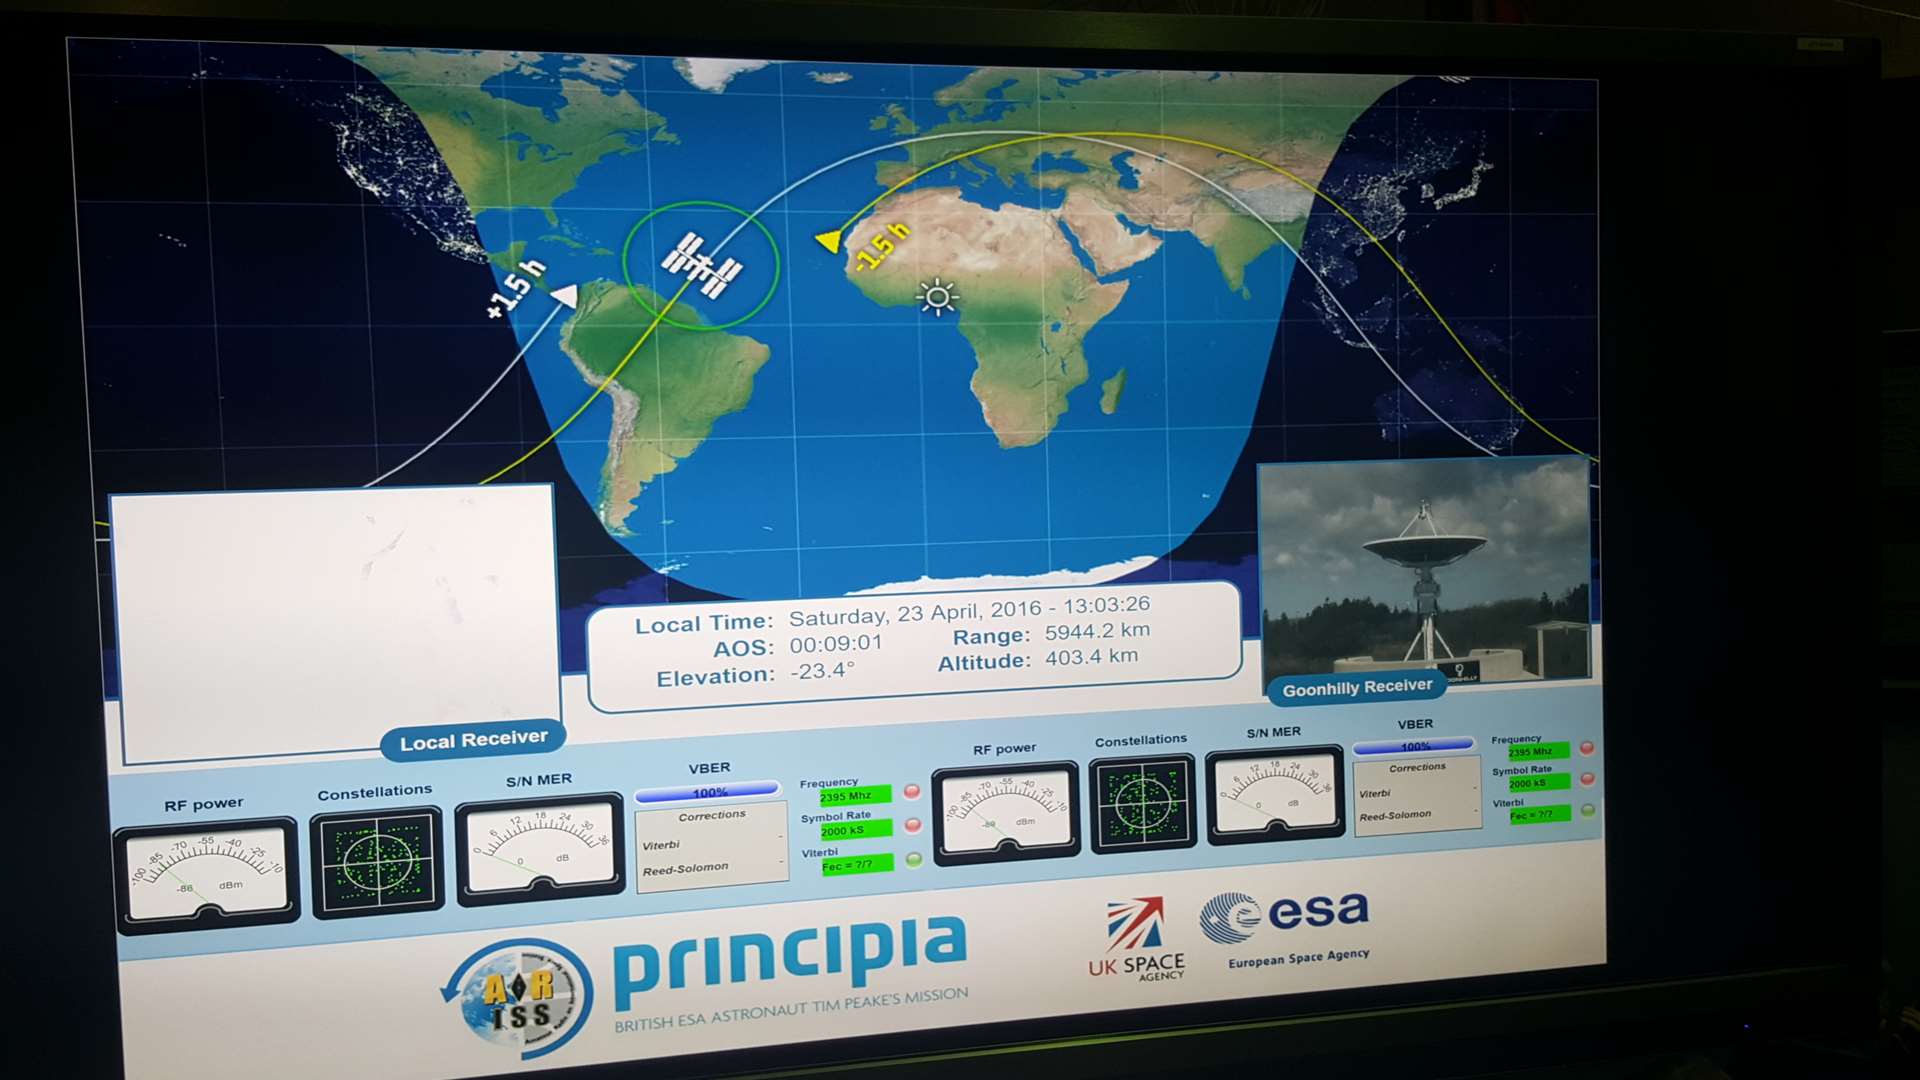 A live feed of the International Space Station position